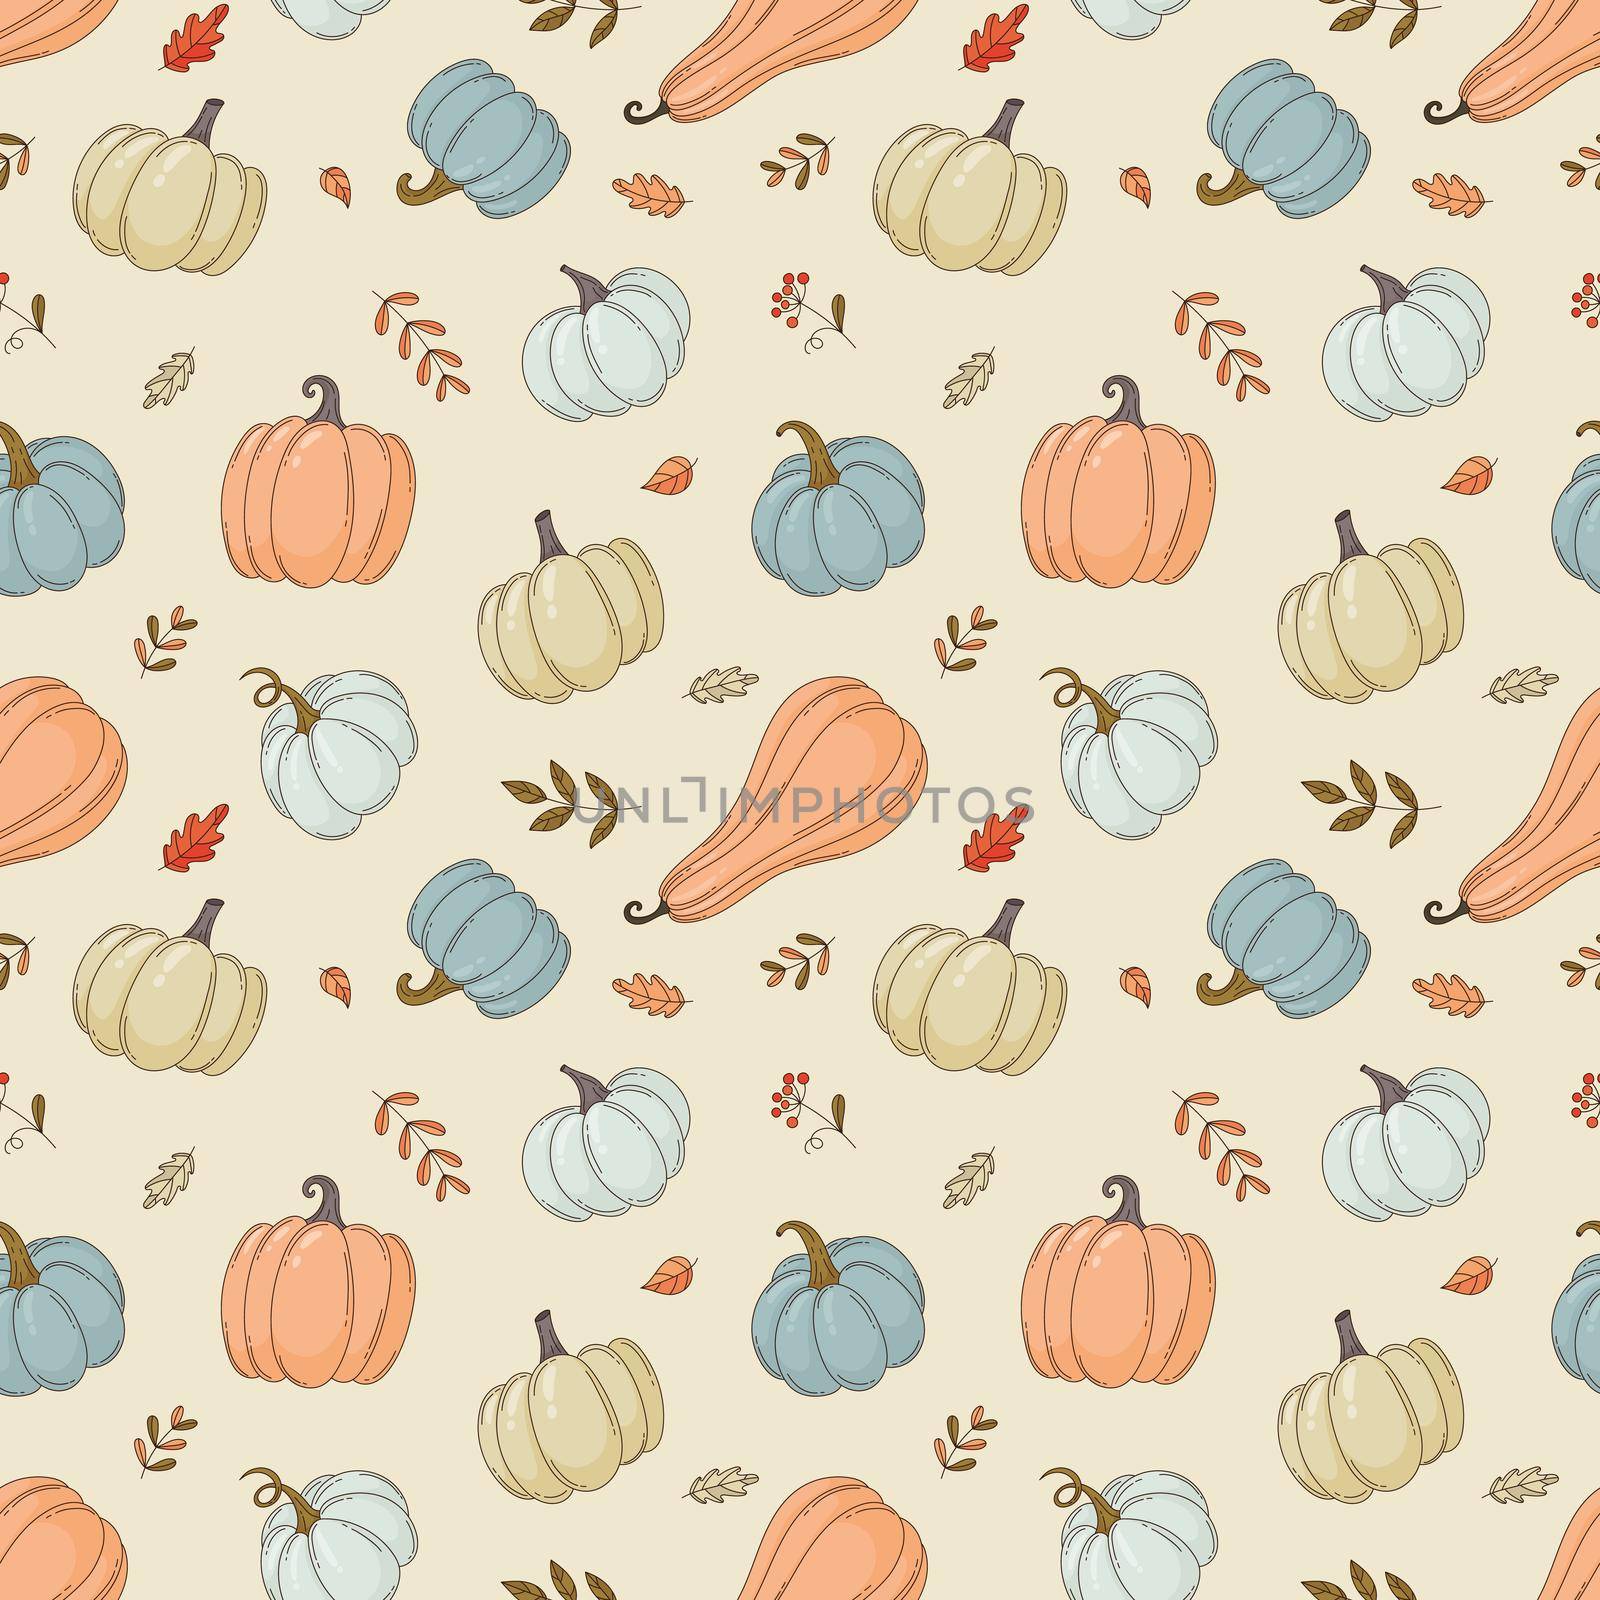 Seamless pattern with varied pumpkins and autumn leaves. Seamless background for autumn holidays, fabric, wrapping paper. Vector illustration in cartoon style